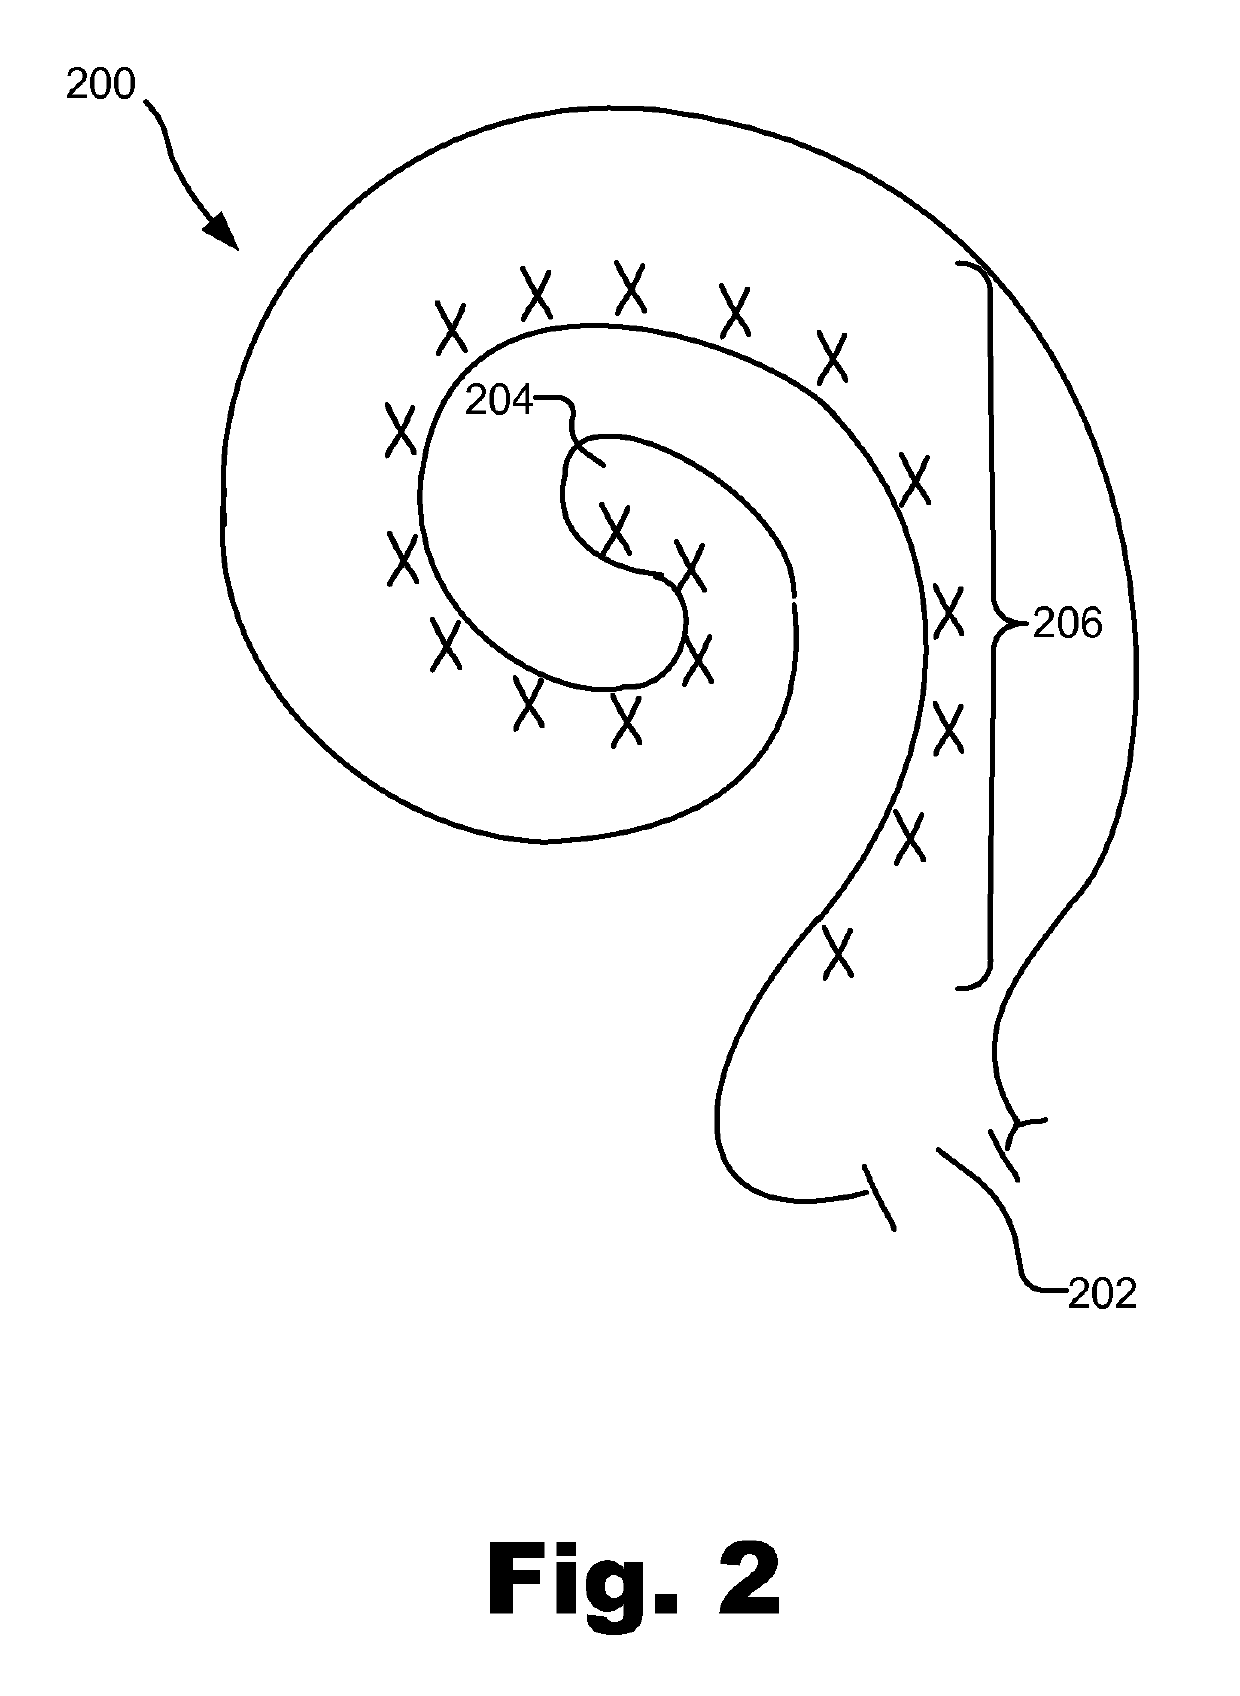 Frequency-dependent focusing systems and methods for use in a cochlear implant system